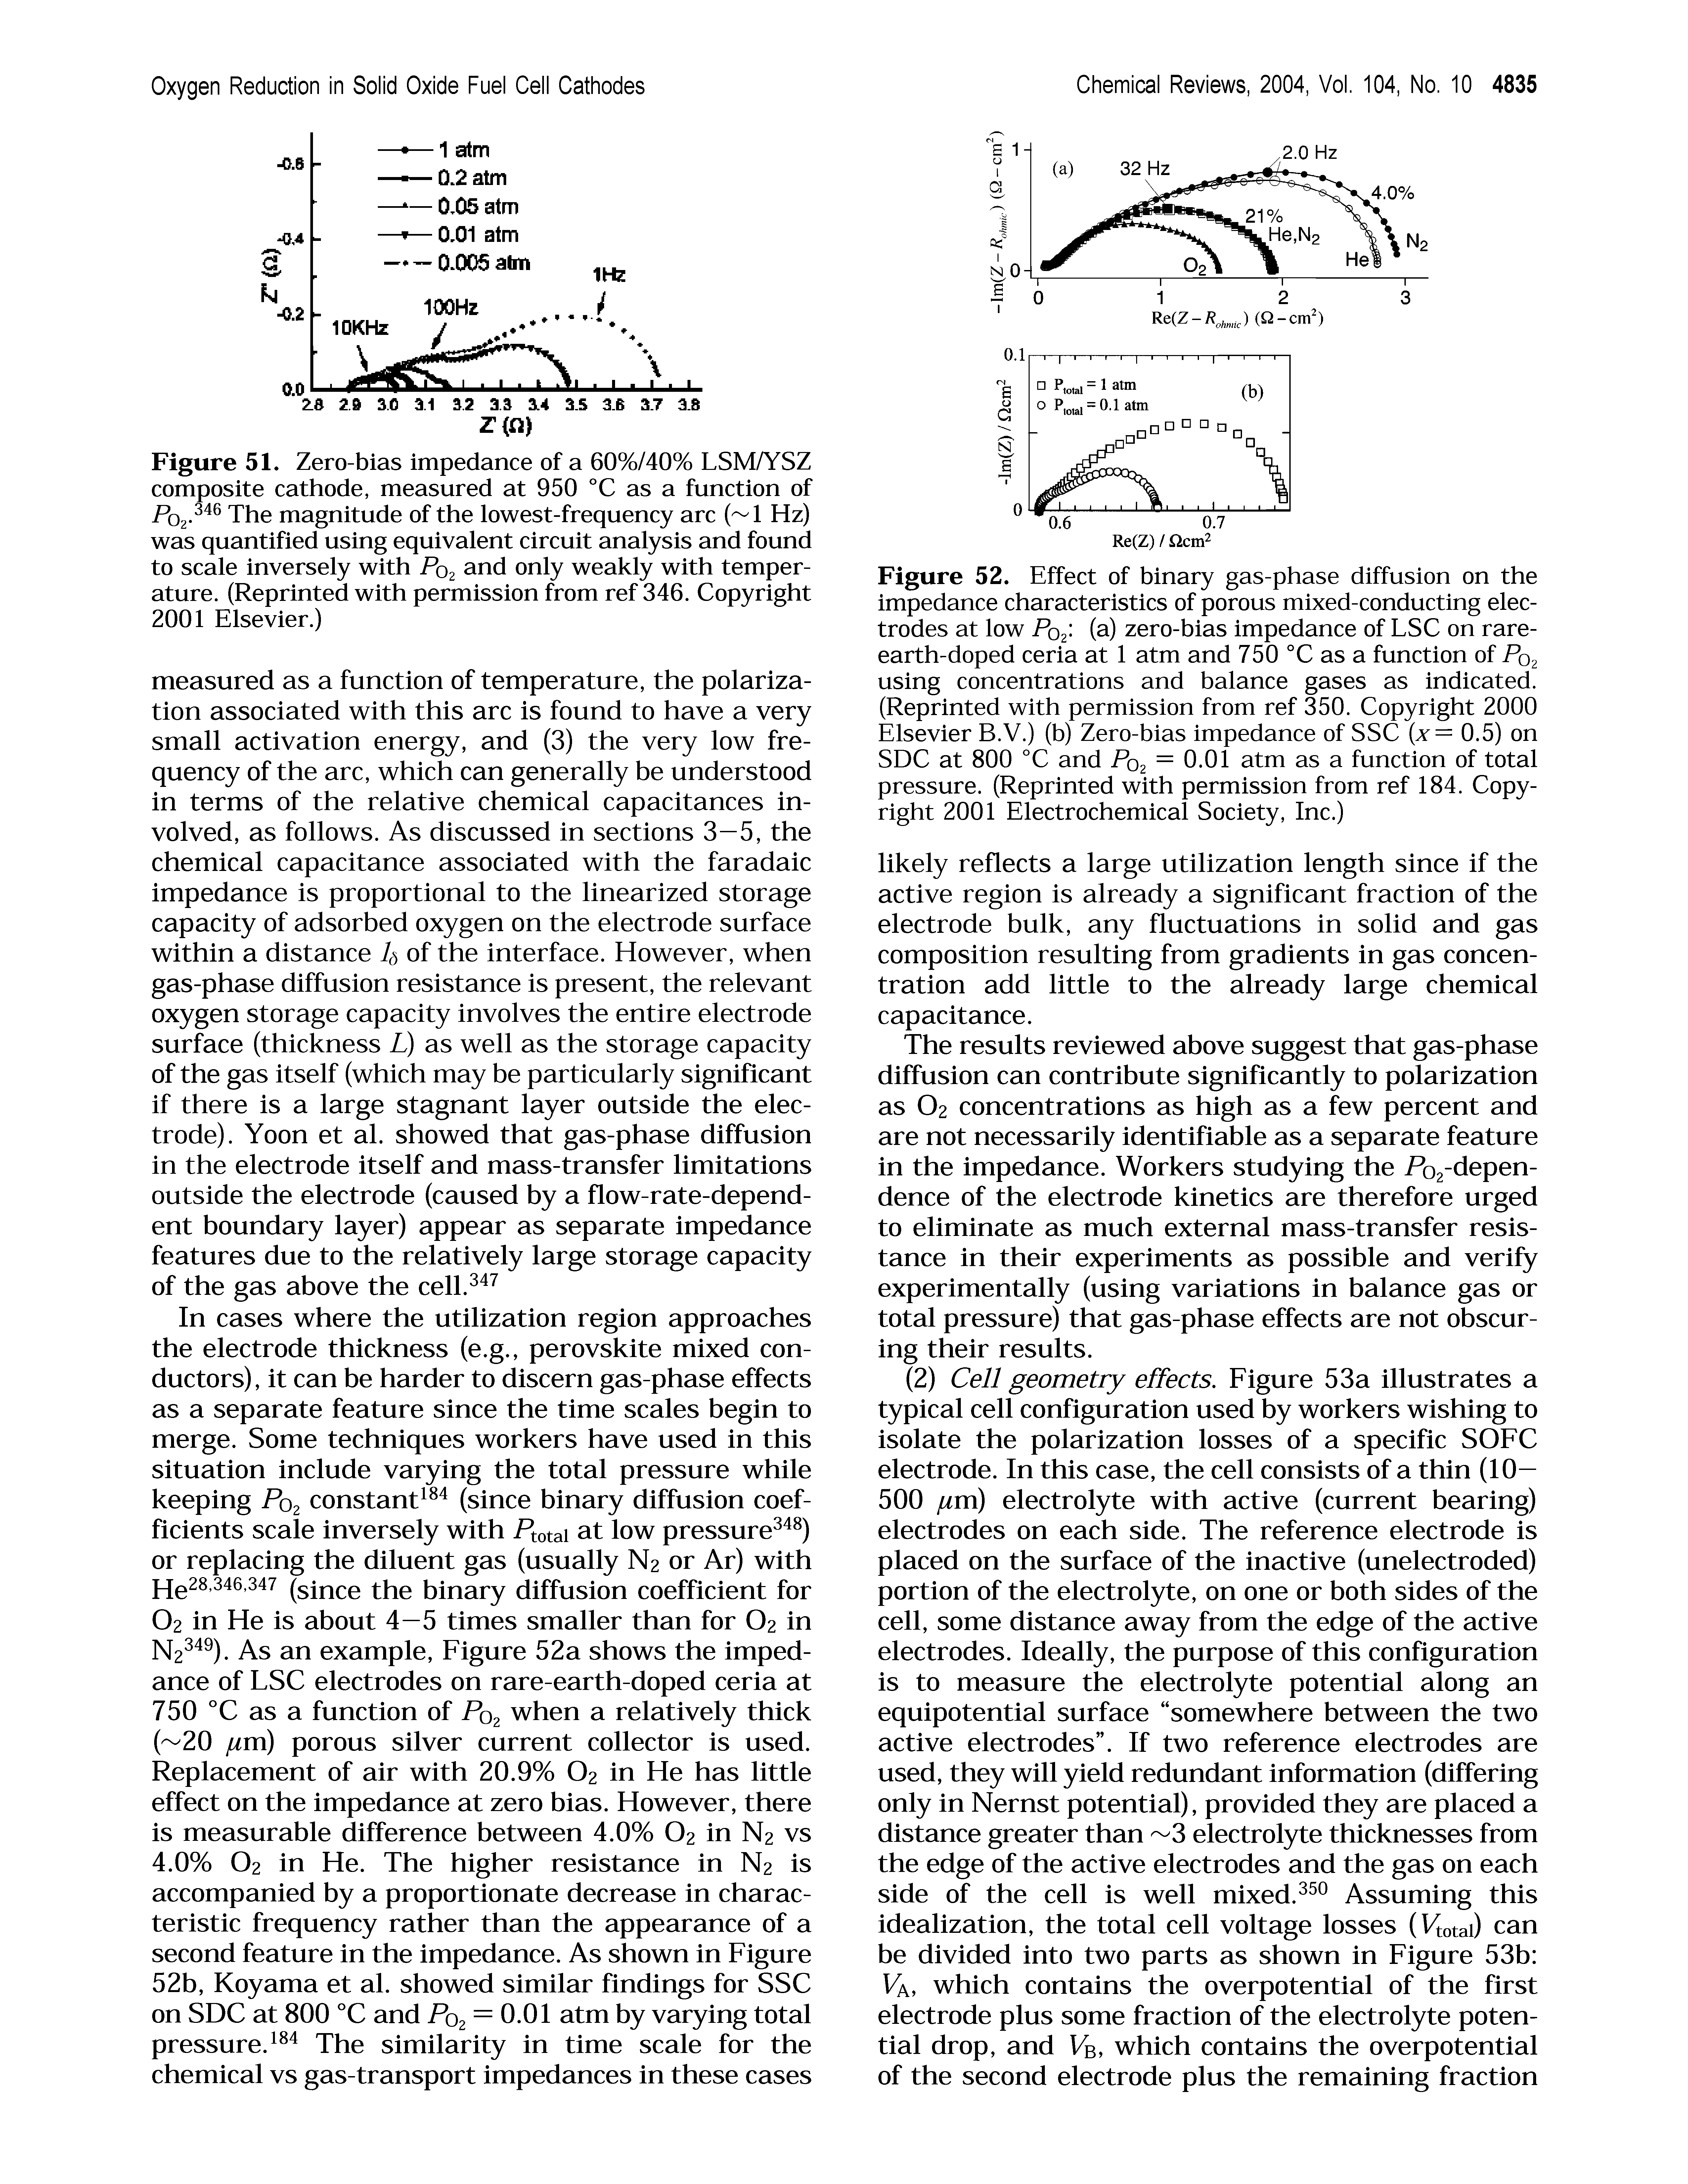 Figure 52. Effect of binary gas-phase diffusion on the impedance characteristics of porous mixed-conducting electrodes at low Por (a) zero-bias impedance of LSC on rare-earth-doped ceria at 1 atm and 750 °C as a function of Pq using concentrations and balance gases as indicated. (Reprinted with permission from ref 350. Copyright 2000 Elsevier B.V.) (b) Zero-bias impedance of SSC x= 0.5) on SDC at 800 °C and P02 — 9-91 a function of total...